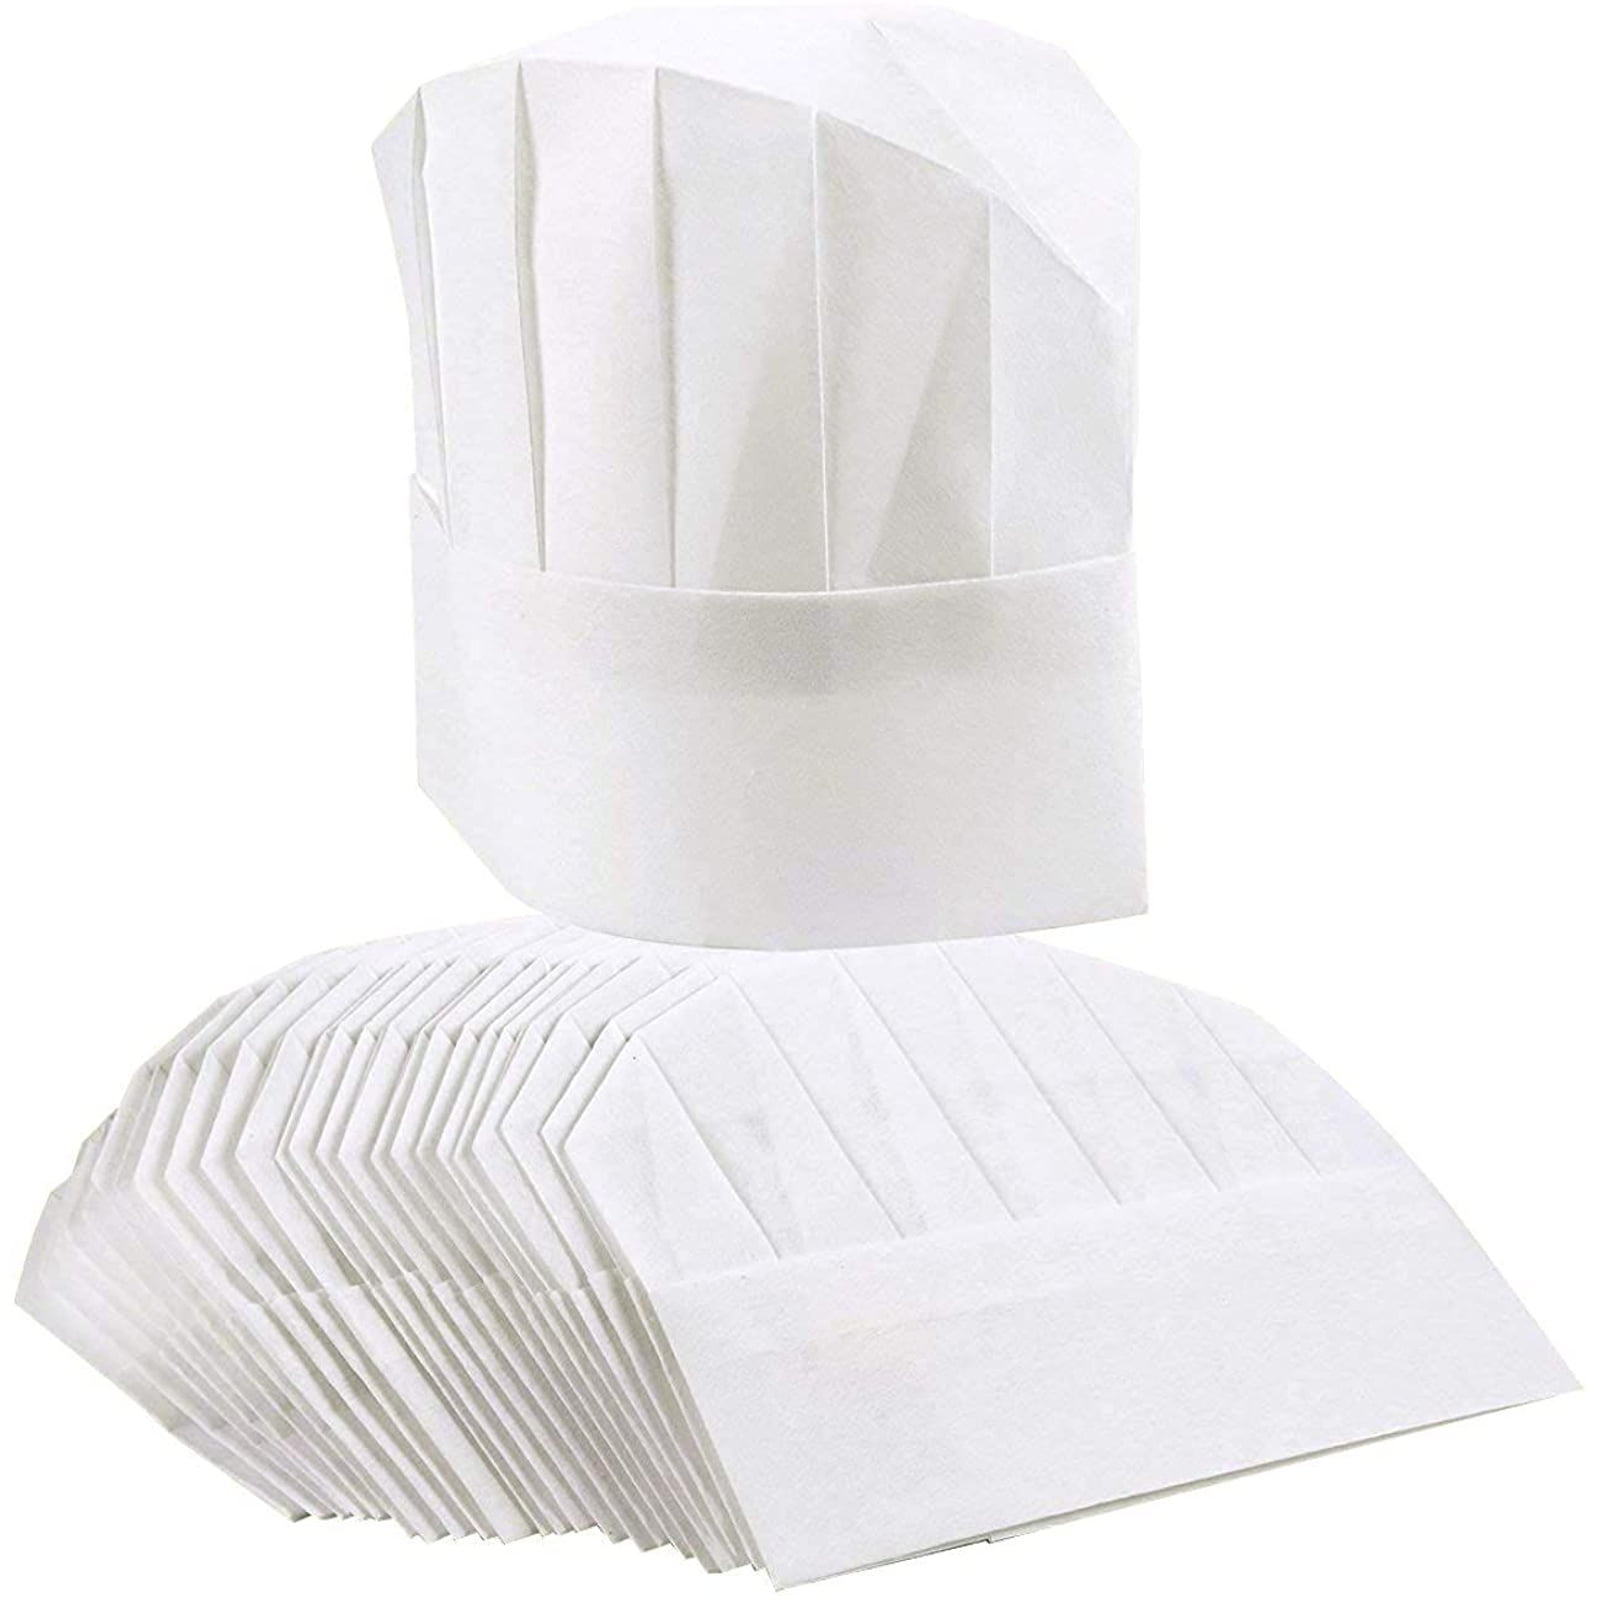 Chef Hat Adjustable Hook Clos Kitchen Cooking Cap for Adult or Kids 2 Pcs White 